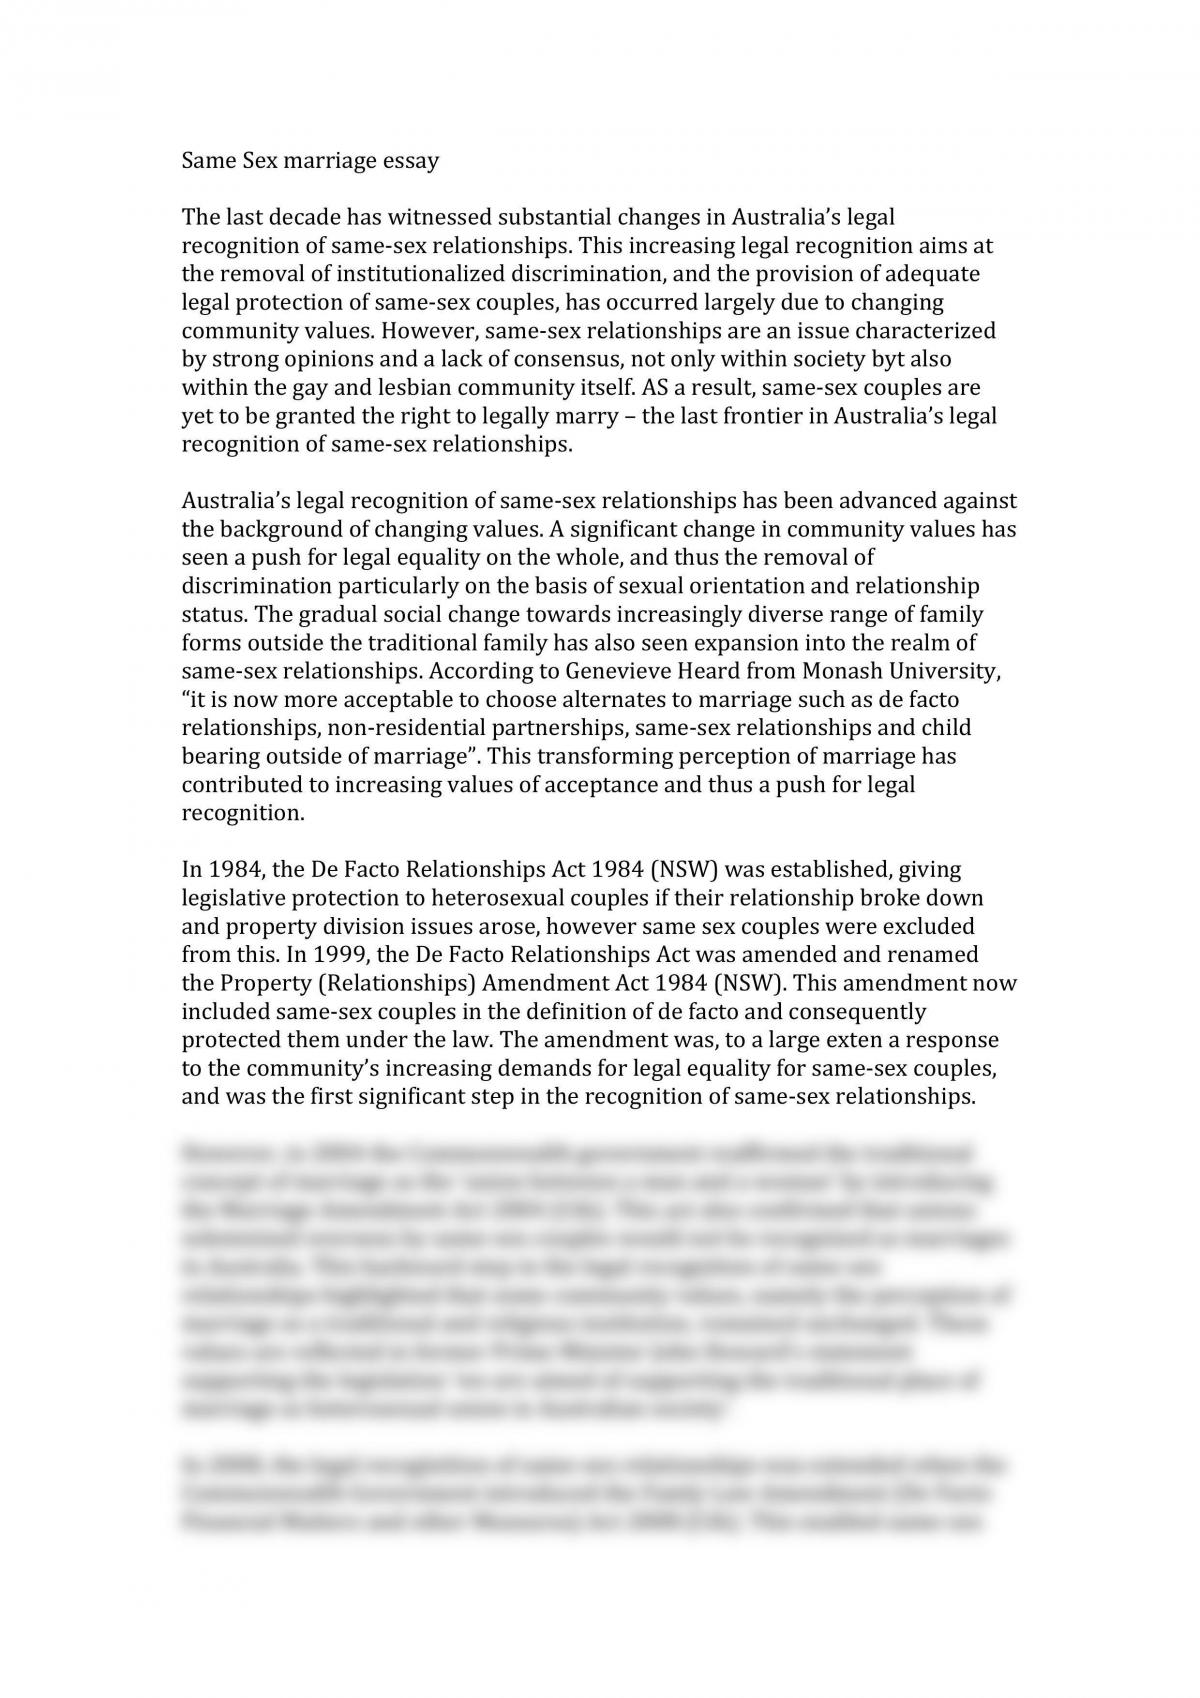 same sex marriage essay introduction body and conclusion